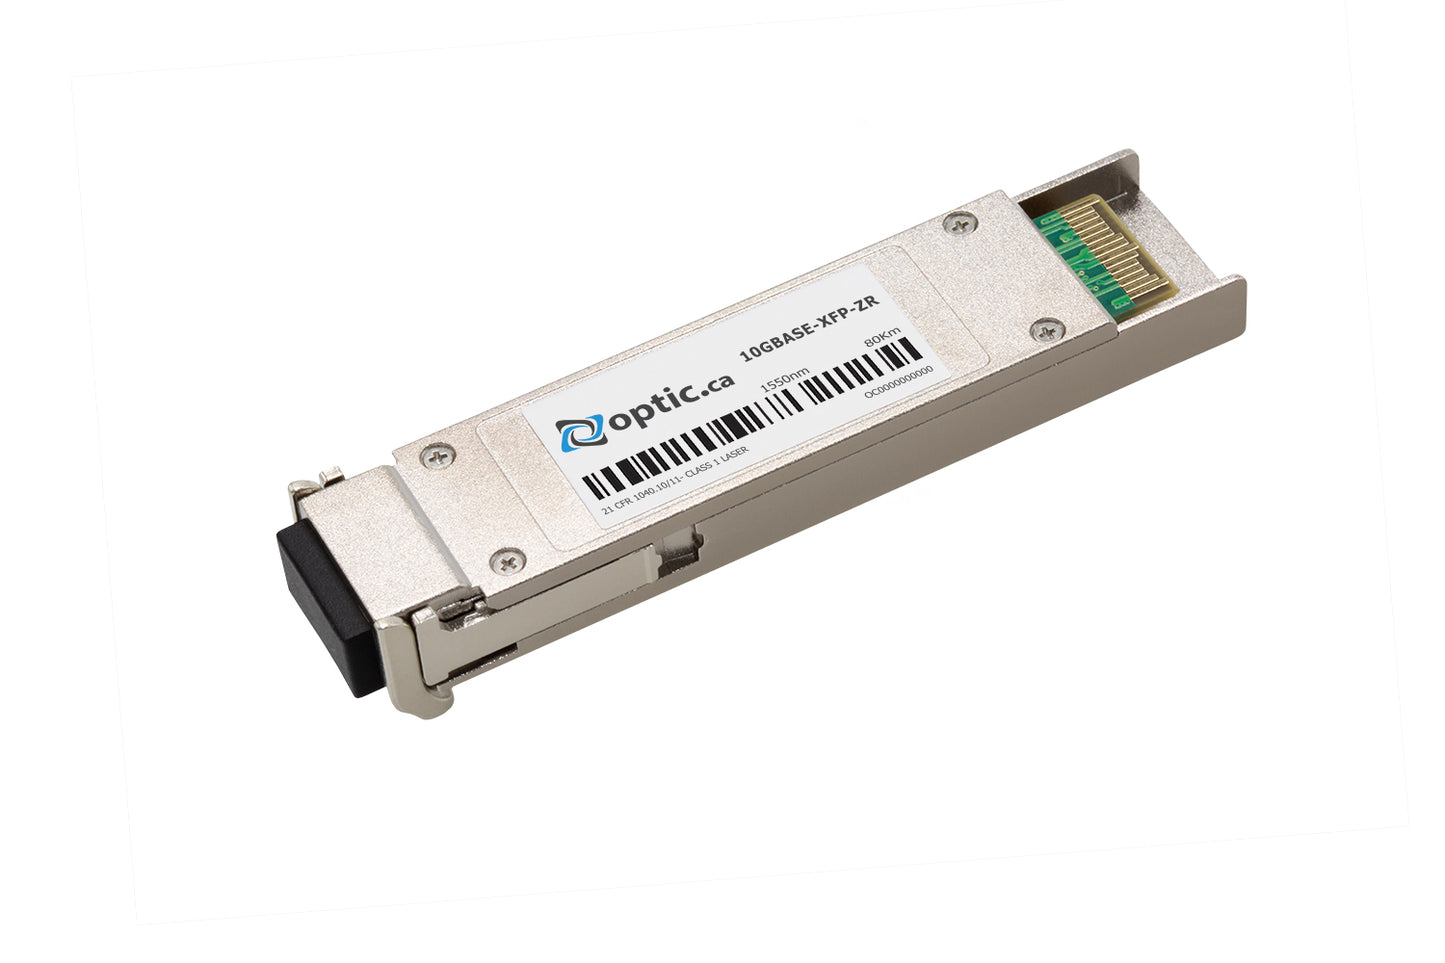 OPTIC.CA - 10GBASE-ZR XFP - 10G-XFP-ZR-OC - BROCADE COMPATIBLE